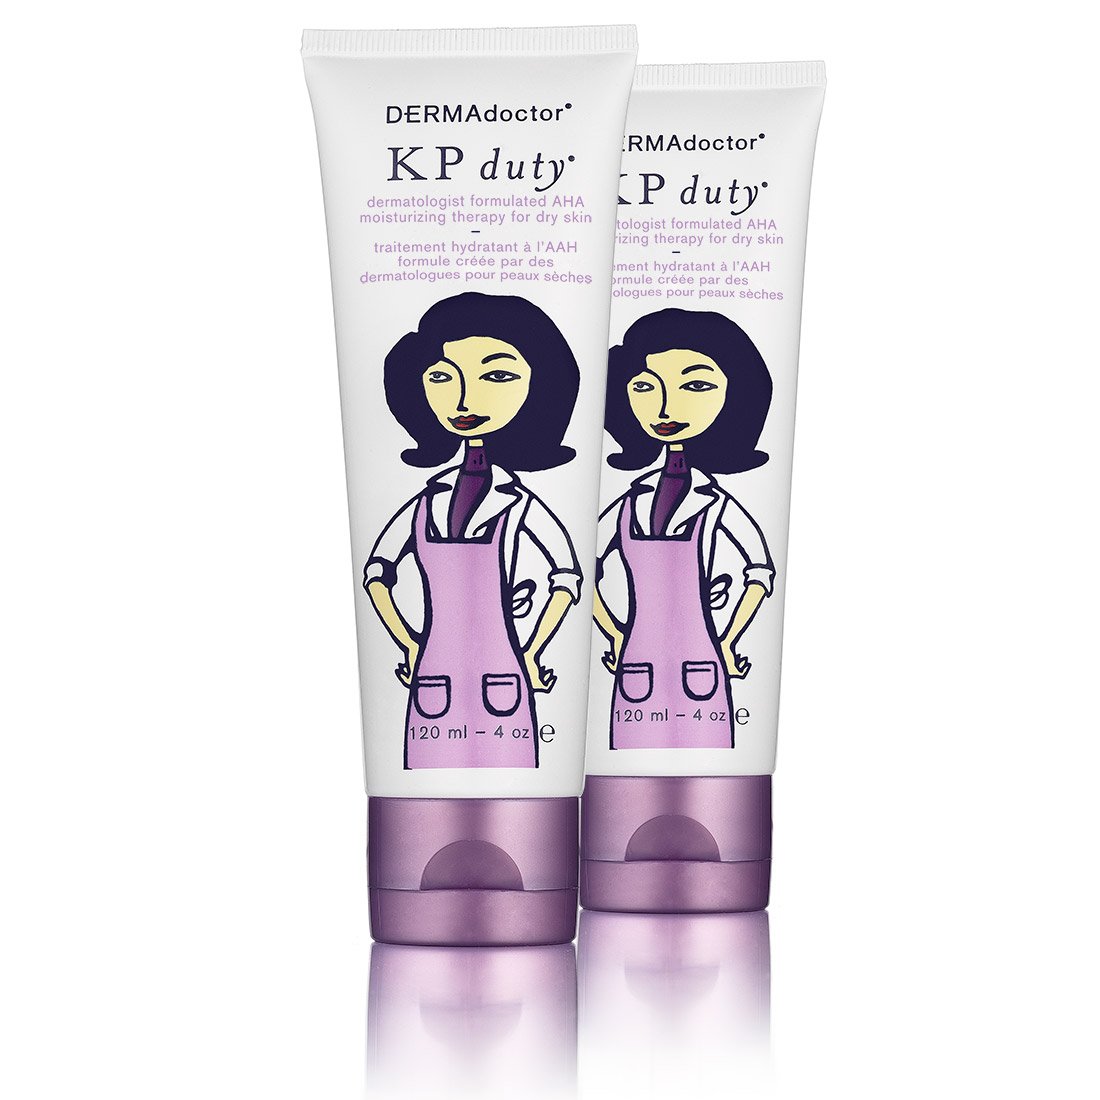 339252 4.06 Oz Kp Duty Double Duty Dermatologist Formulated Therapy For Dry, Rough, Bumpy Skin - Dual Pack By For Women